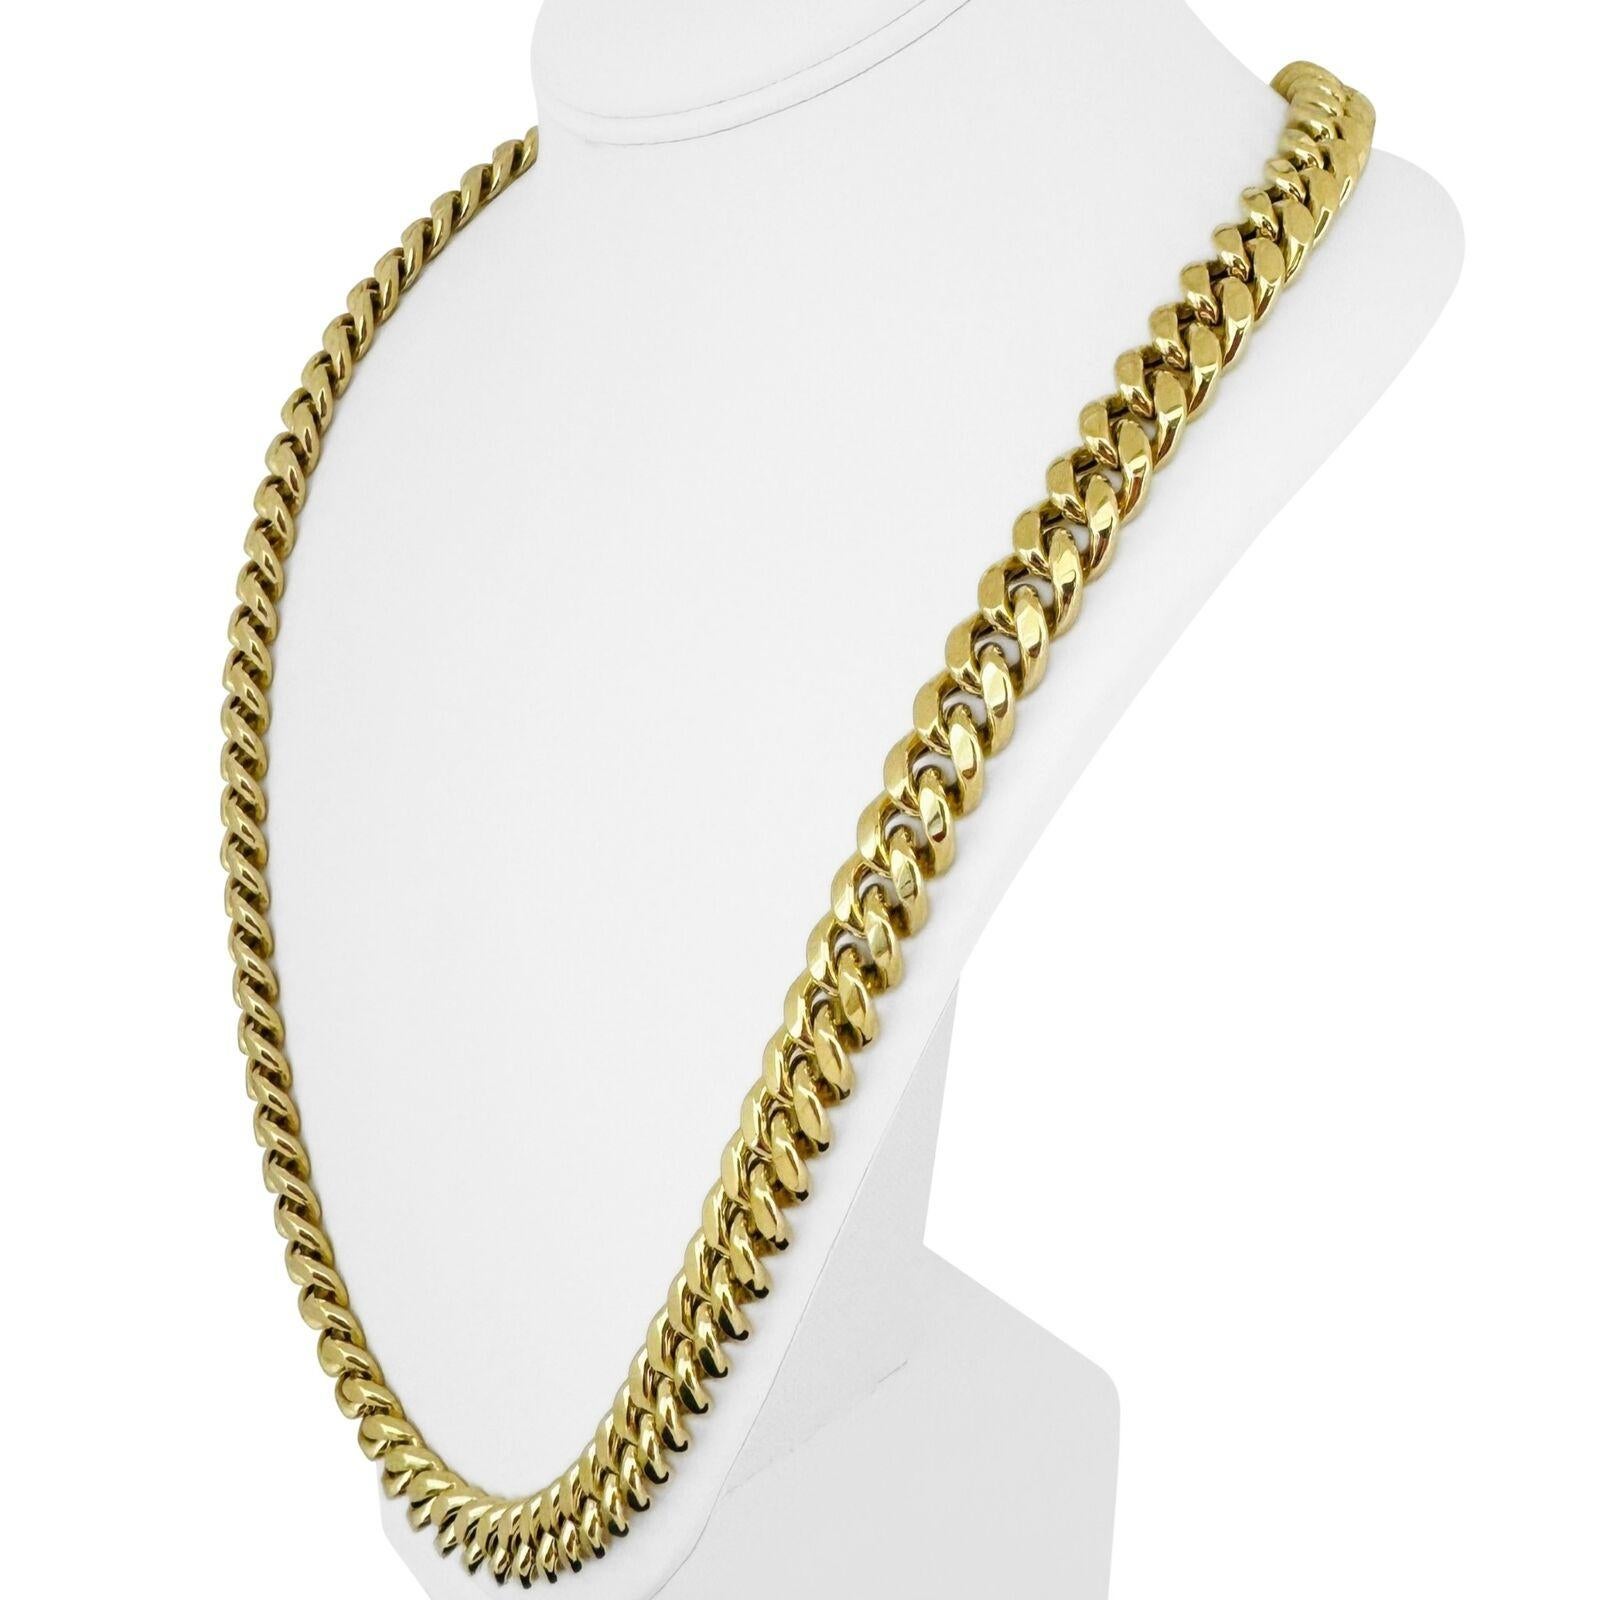 10k Yellow Gold 88g Hollow Thick 11mm Long Cuban Link Chain Necklace 30